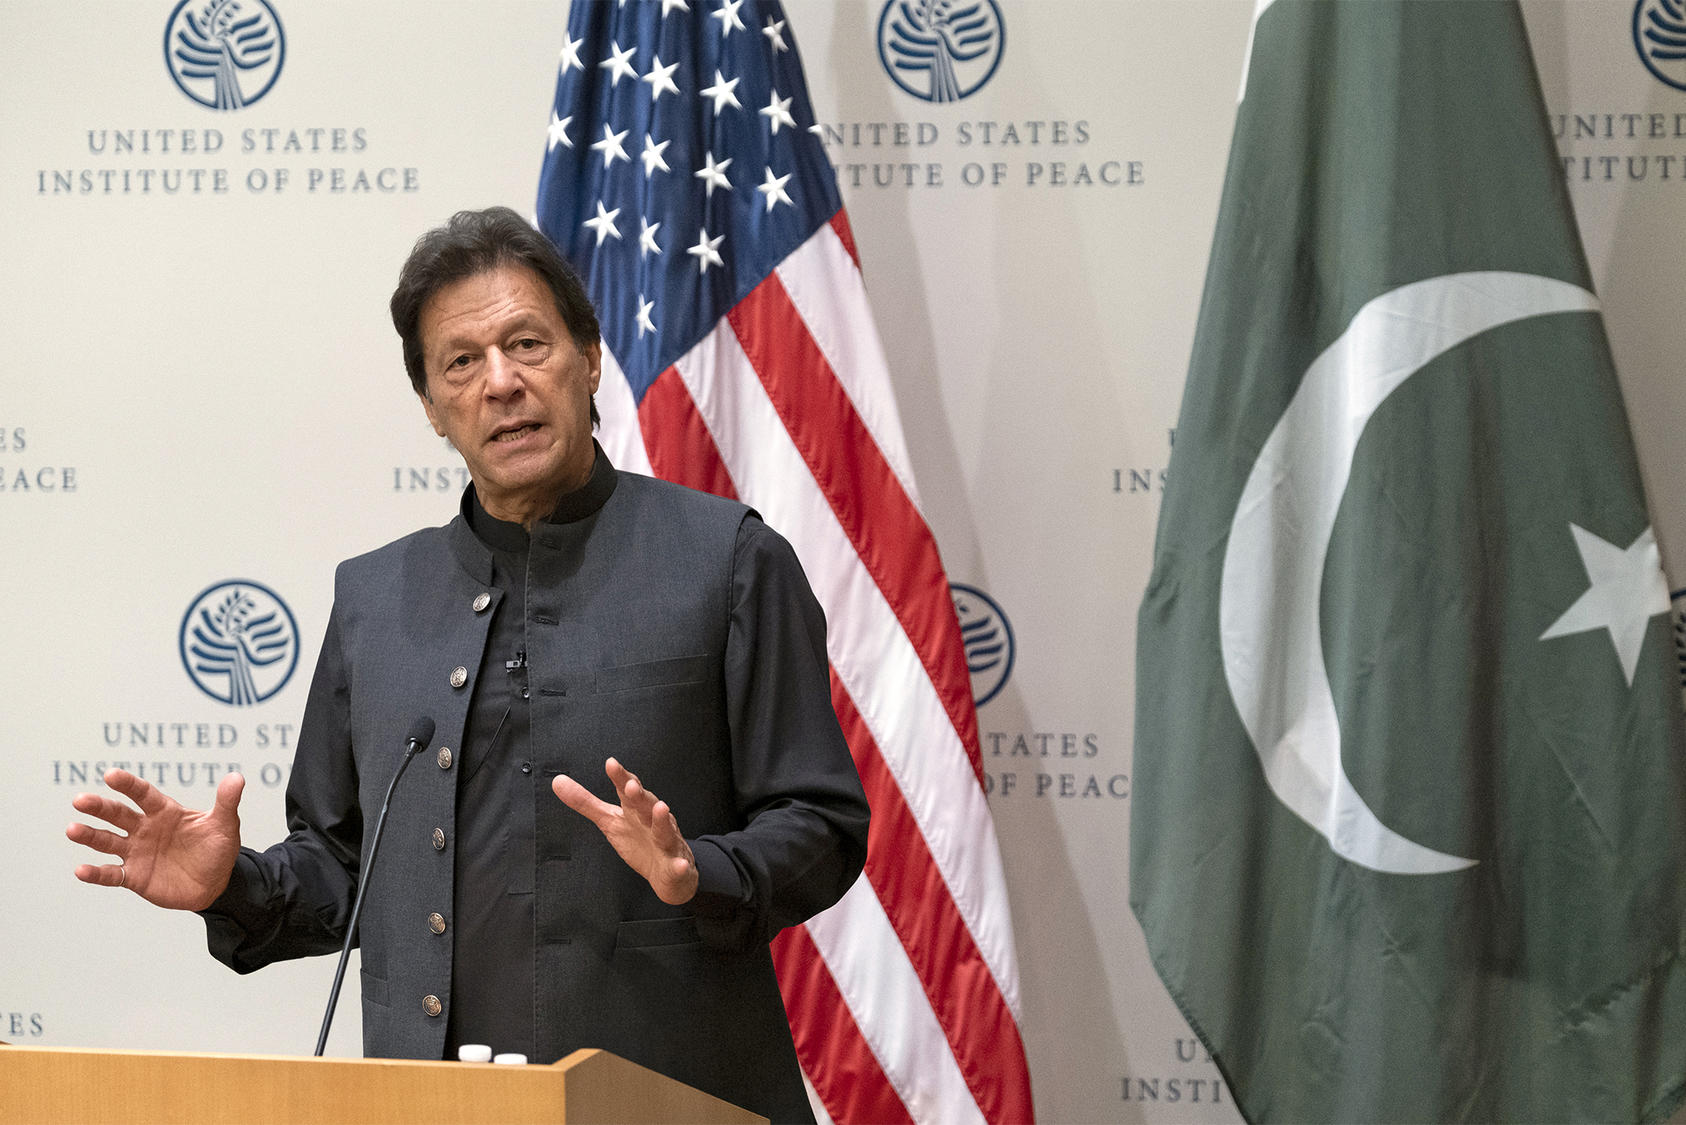 During his first official trip to Washington since taking office in 2018, Pakistan Prime Minster Imran Khan spoke to an audience of U.S. policymakers, scholars, and diplomats at the U.S. Institute of Peace following talks with President Trump.